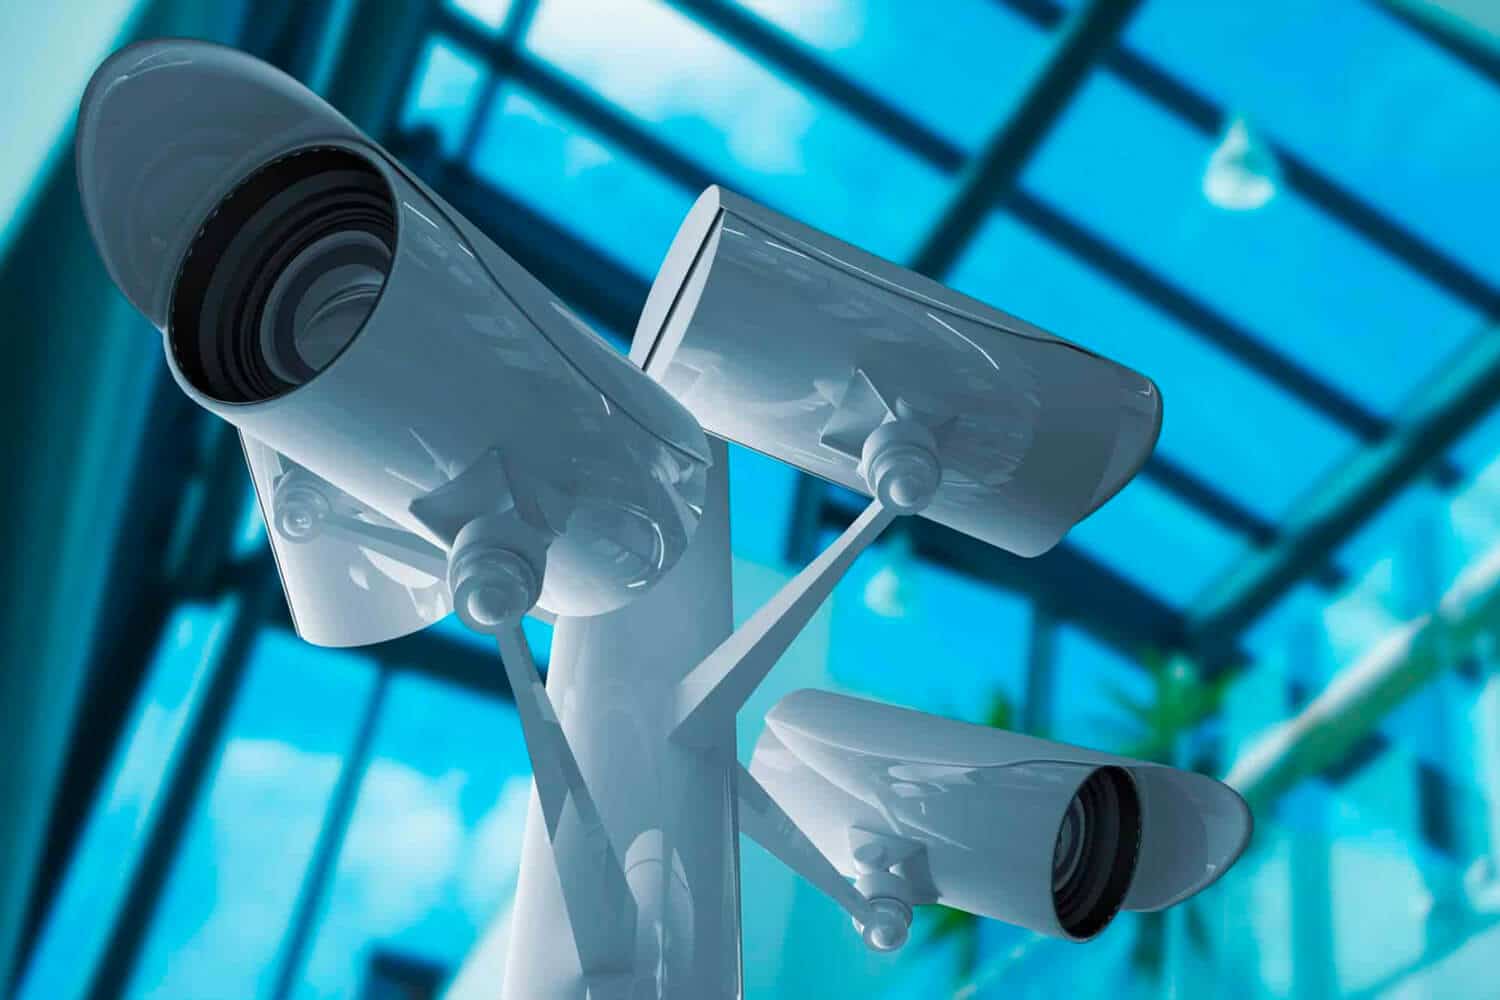 Indoor CCTV security camera with a sky blue background